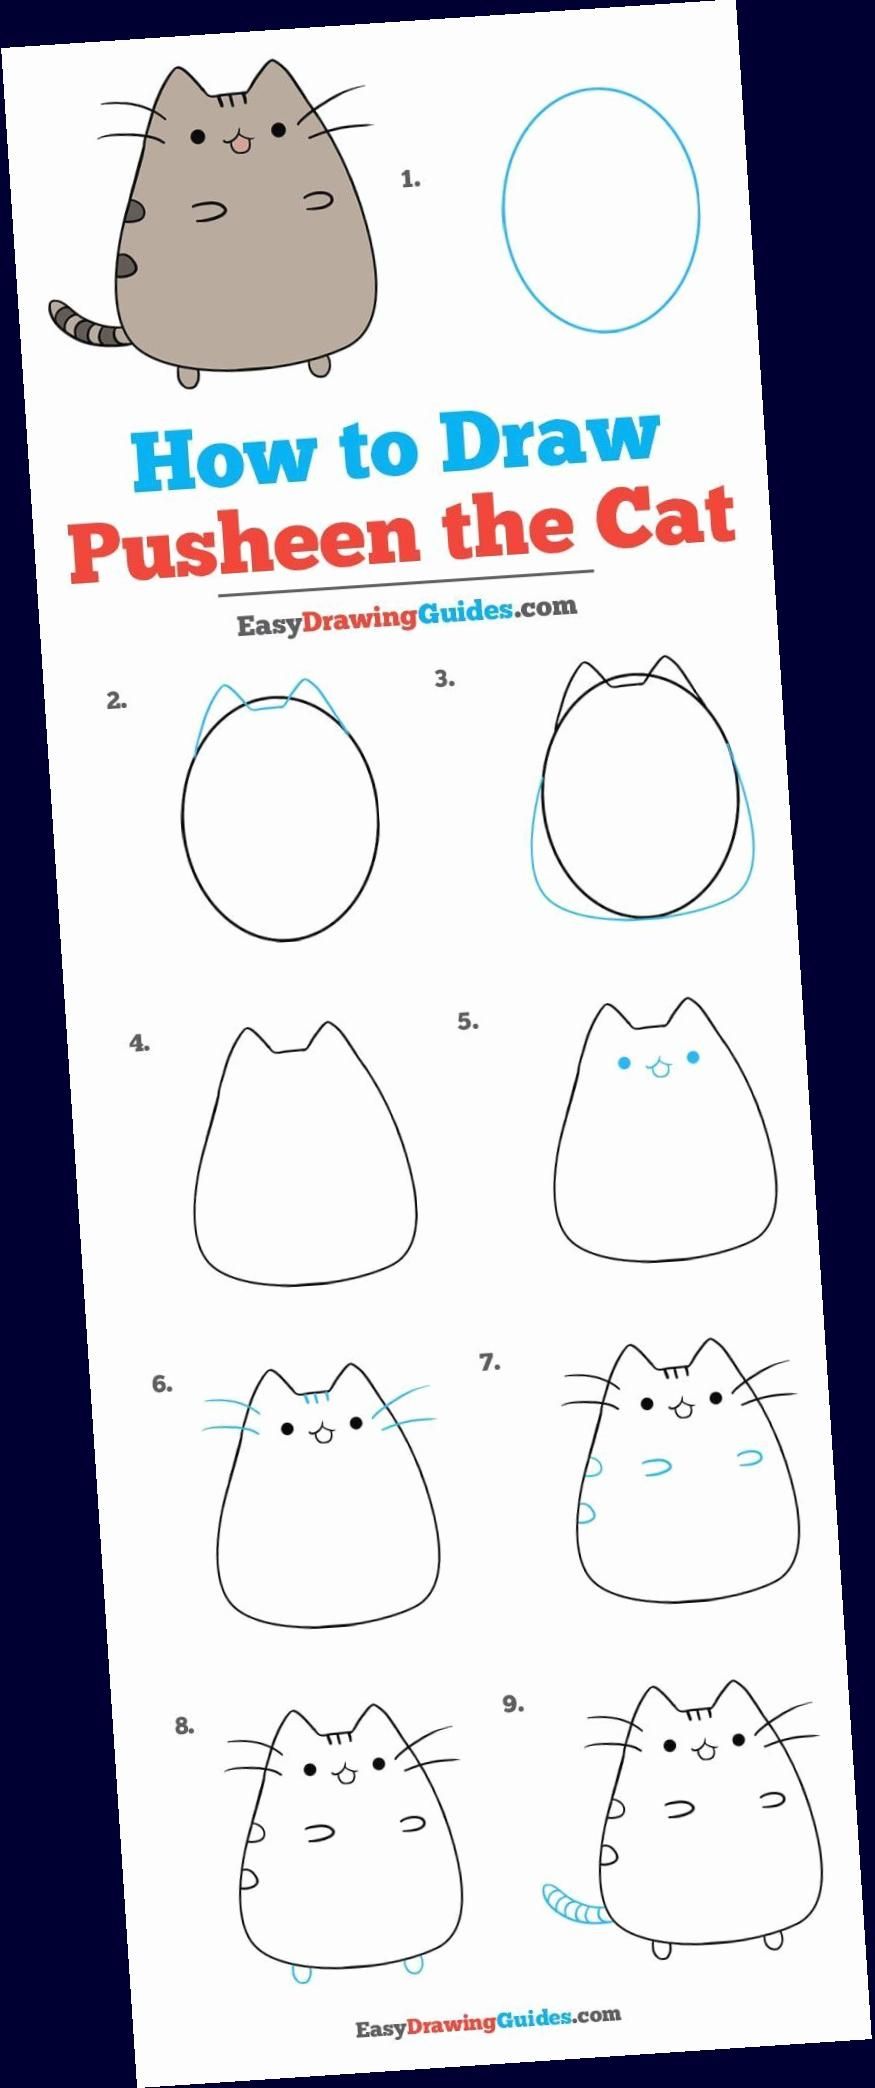 Learn to draw Pusheen the Cat. This step by step tutorial makes it easy. Kids and beginners alike can now draw a great looking Pusheen.